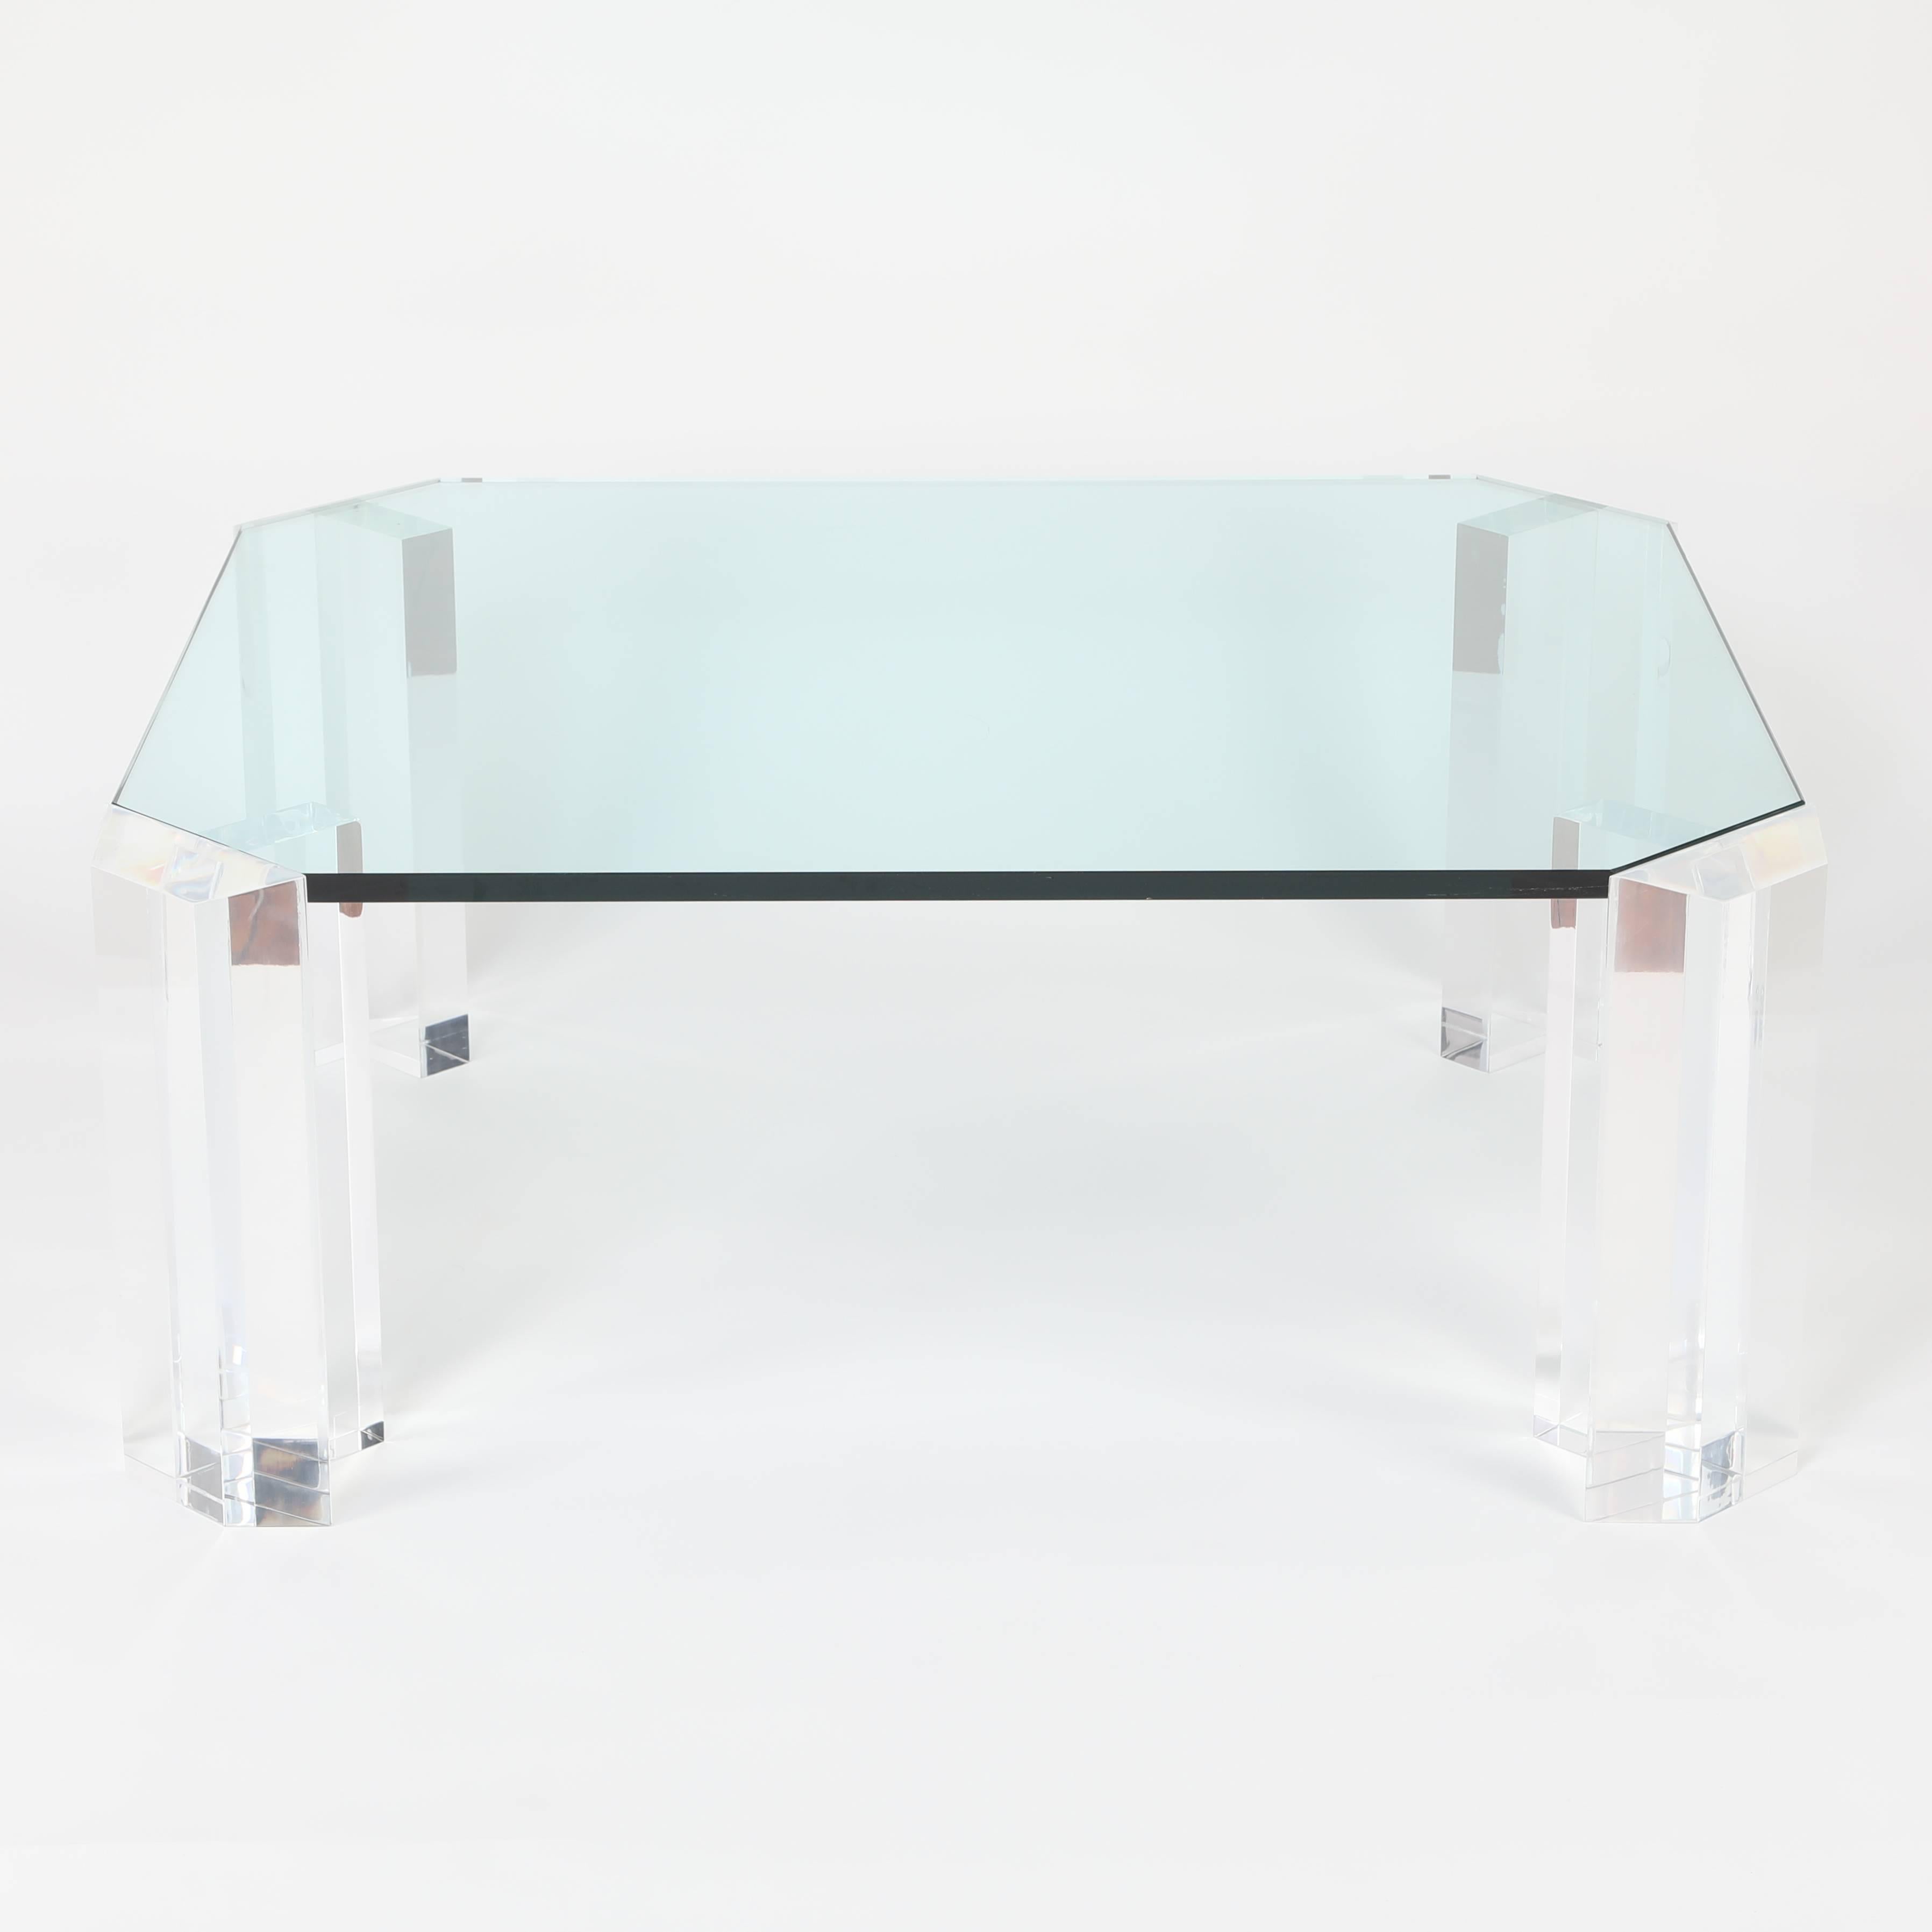 American Rectangular 1970s Glass Cocktail Table with Clipped Corners and Lucite Supports For Sale